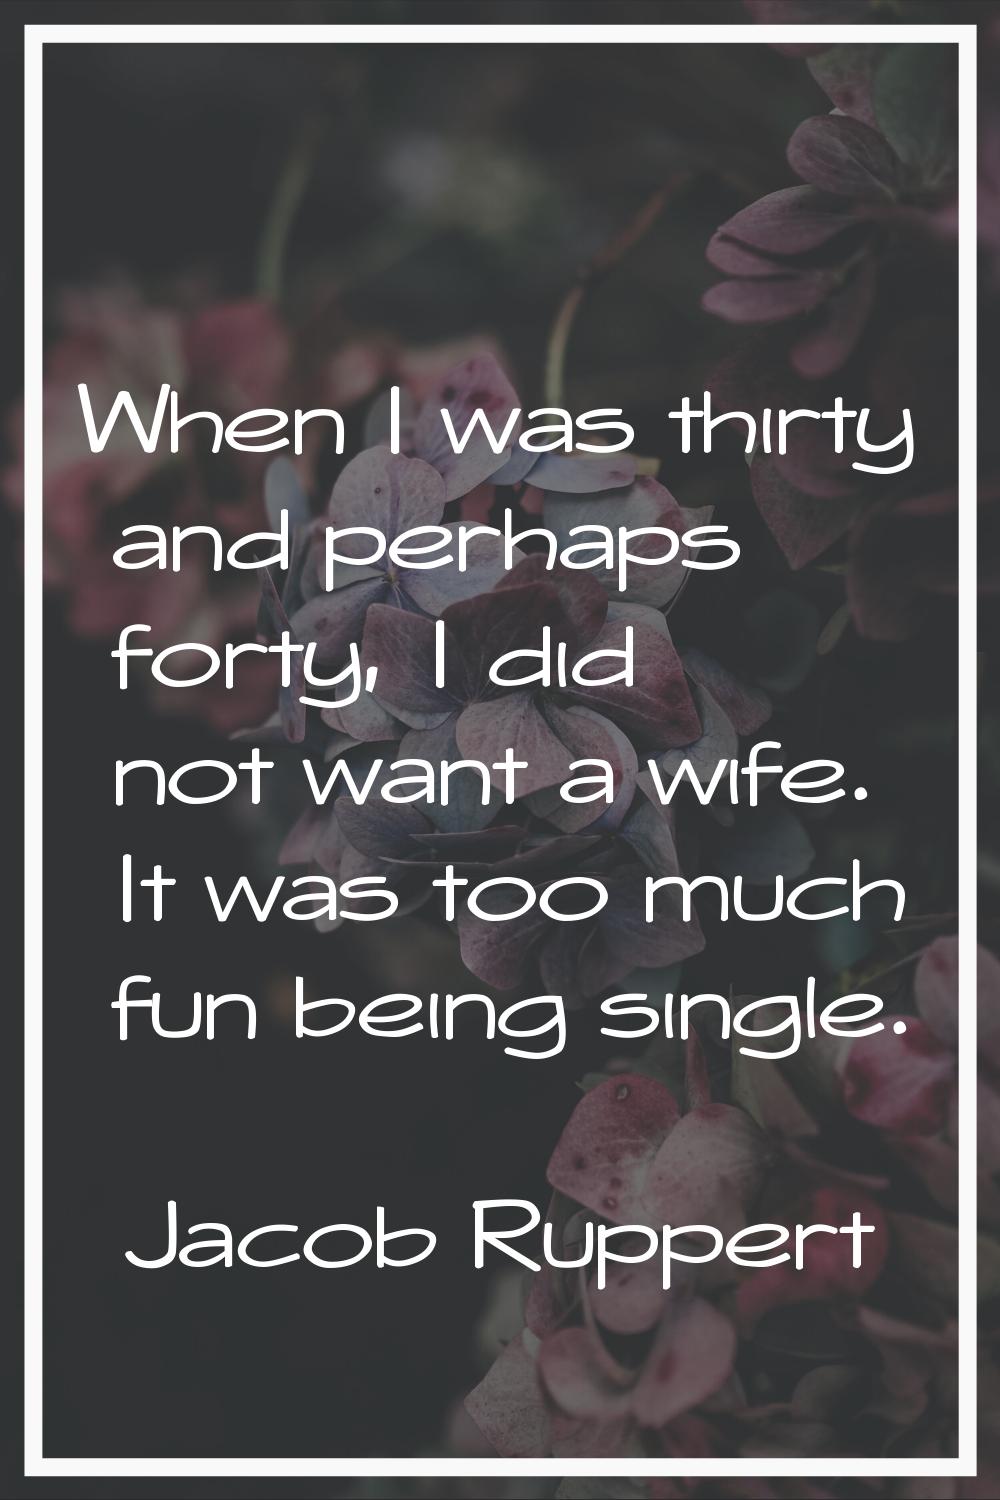 When I was thirty and perhaps forty, I did not want a wife. It was too much fun being single.